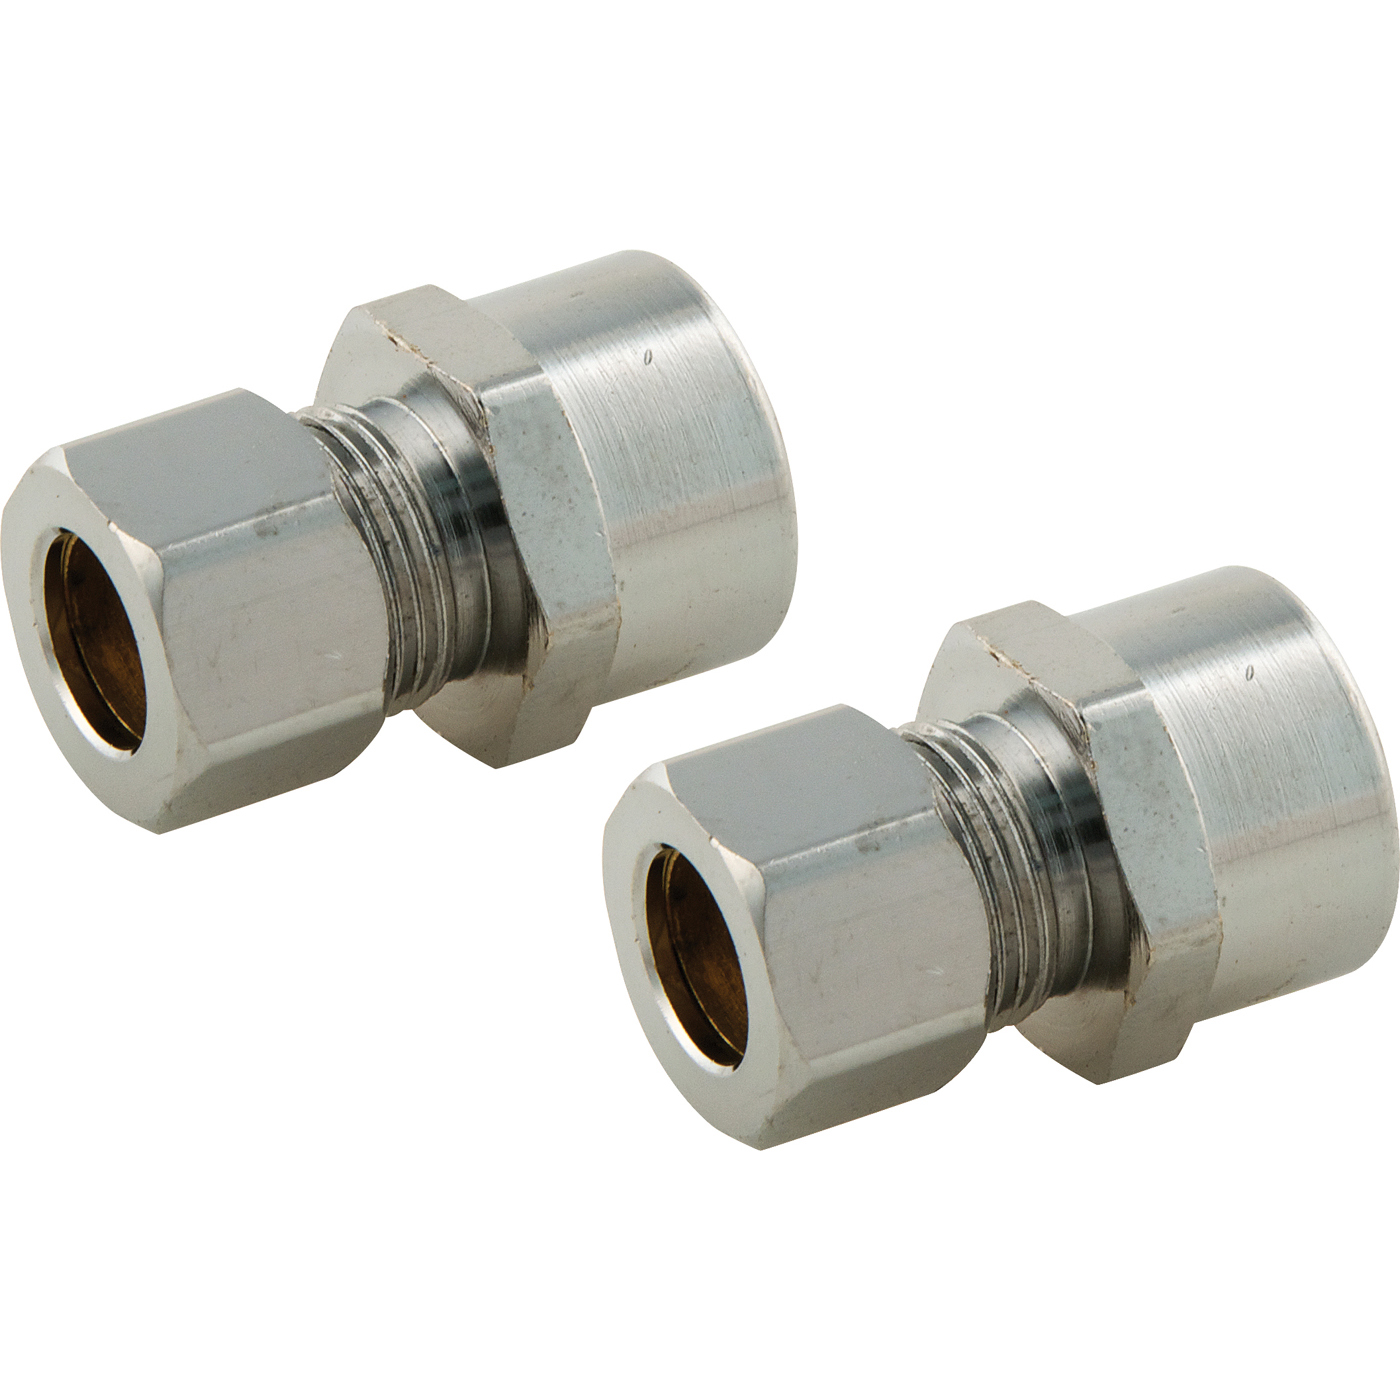 Compression fitting - Sweat reducing adapters - Master Plumber®